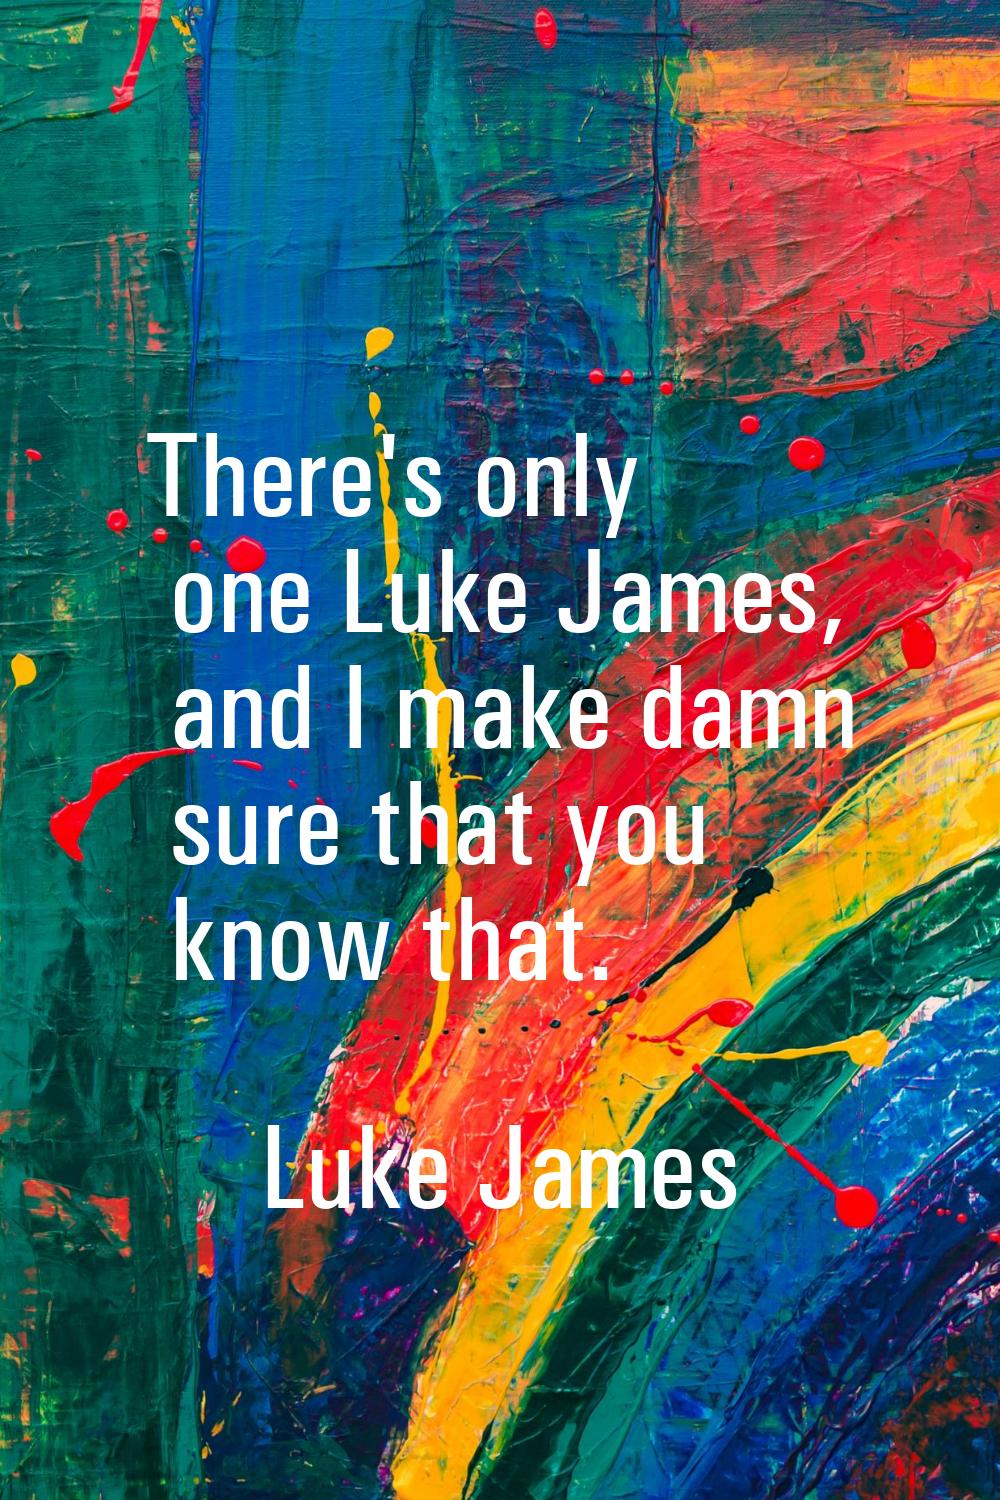 There's only one Luke James, and I make damn sure that you know that.